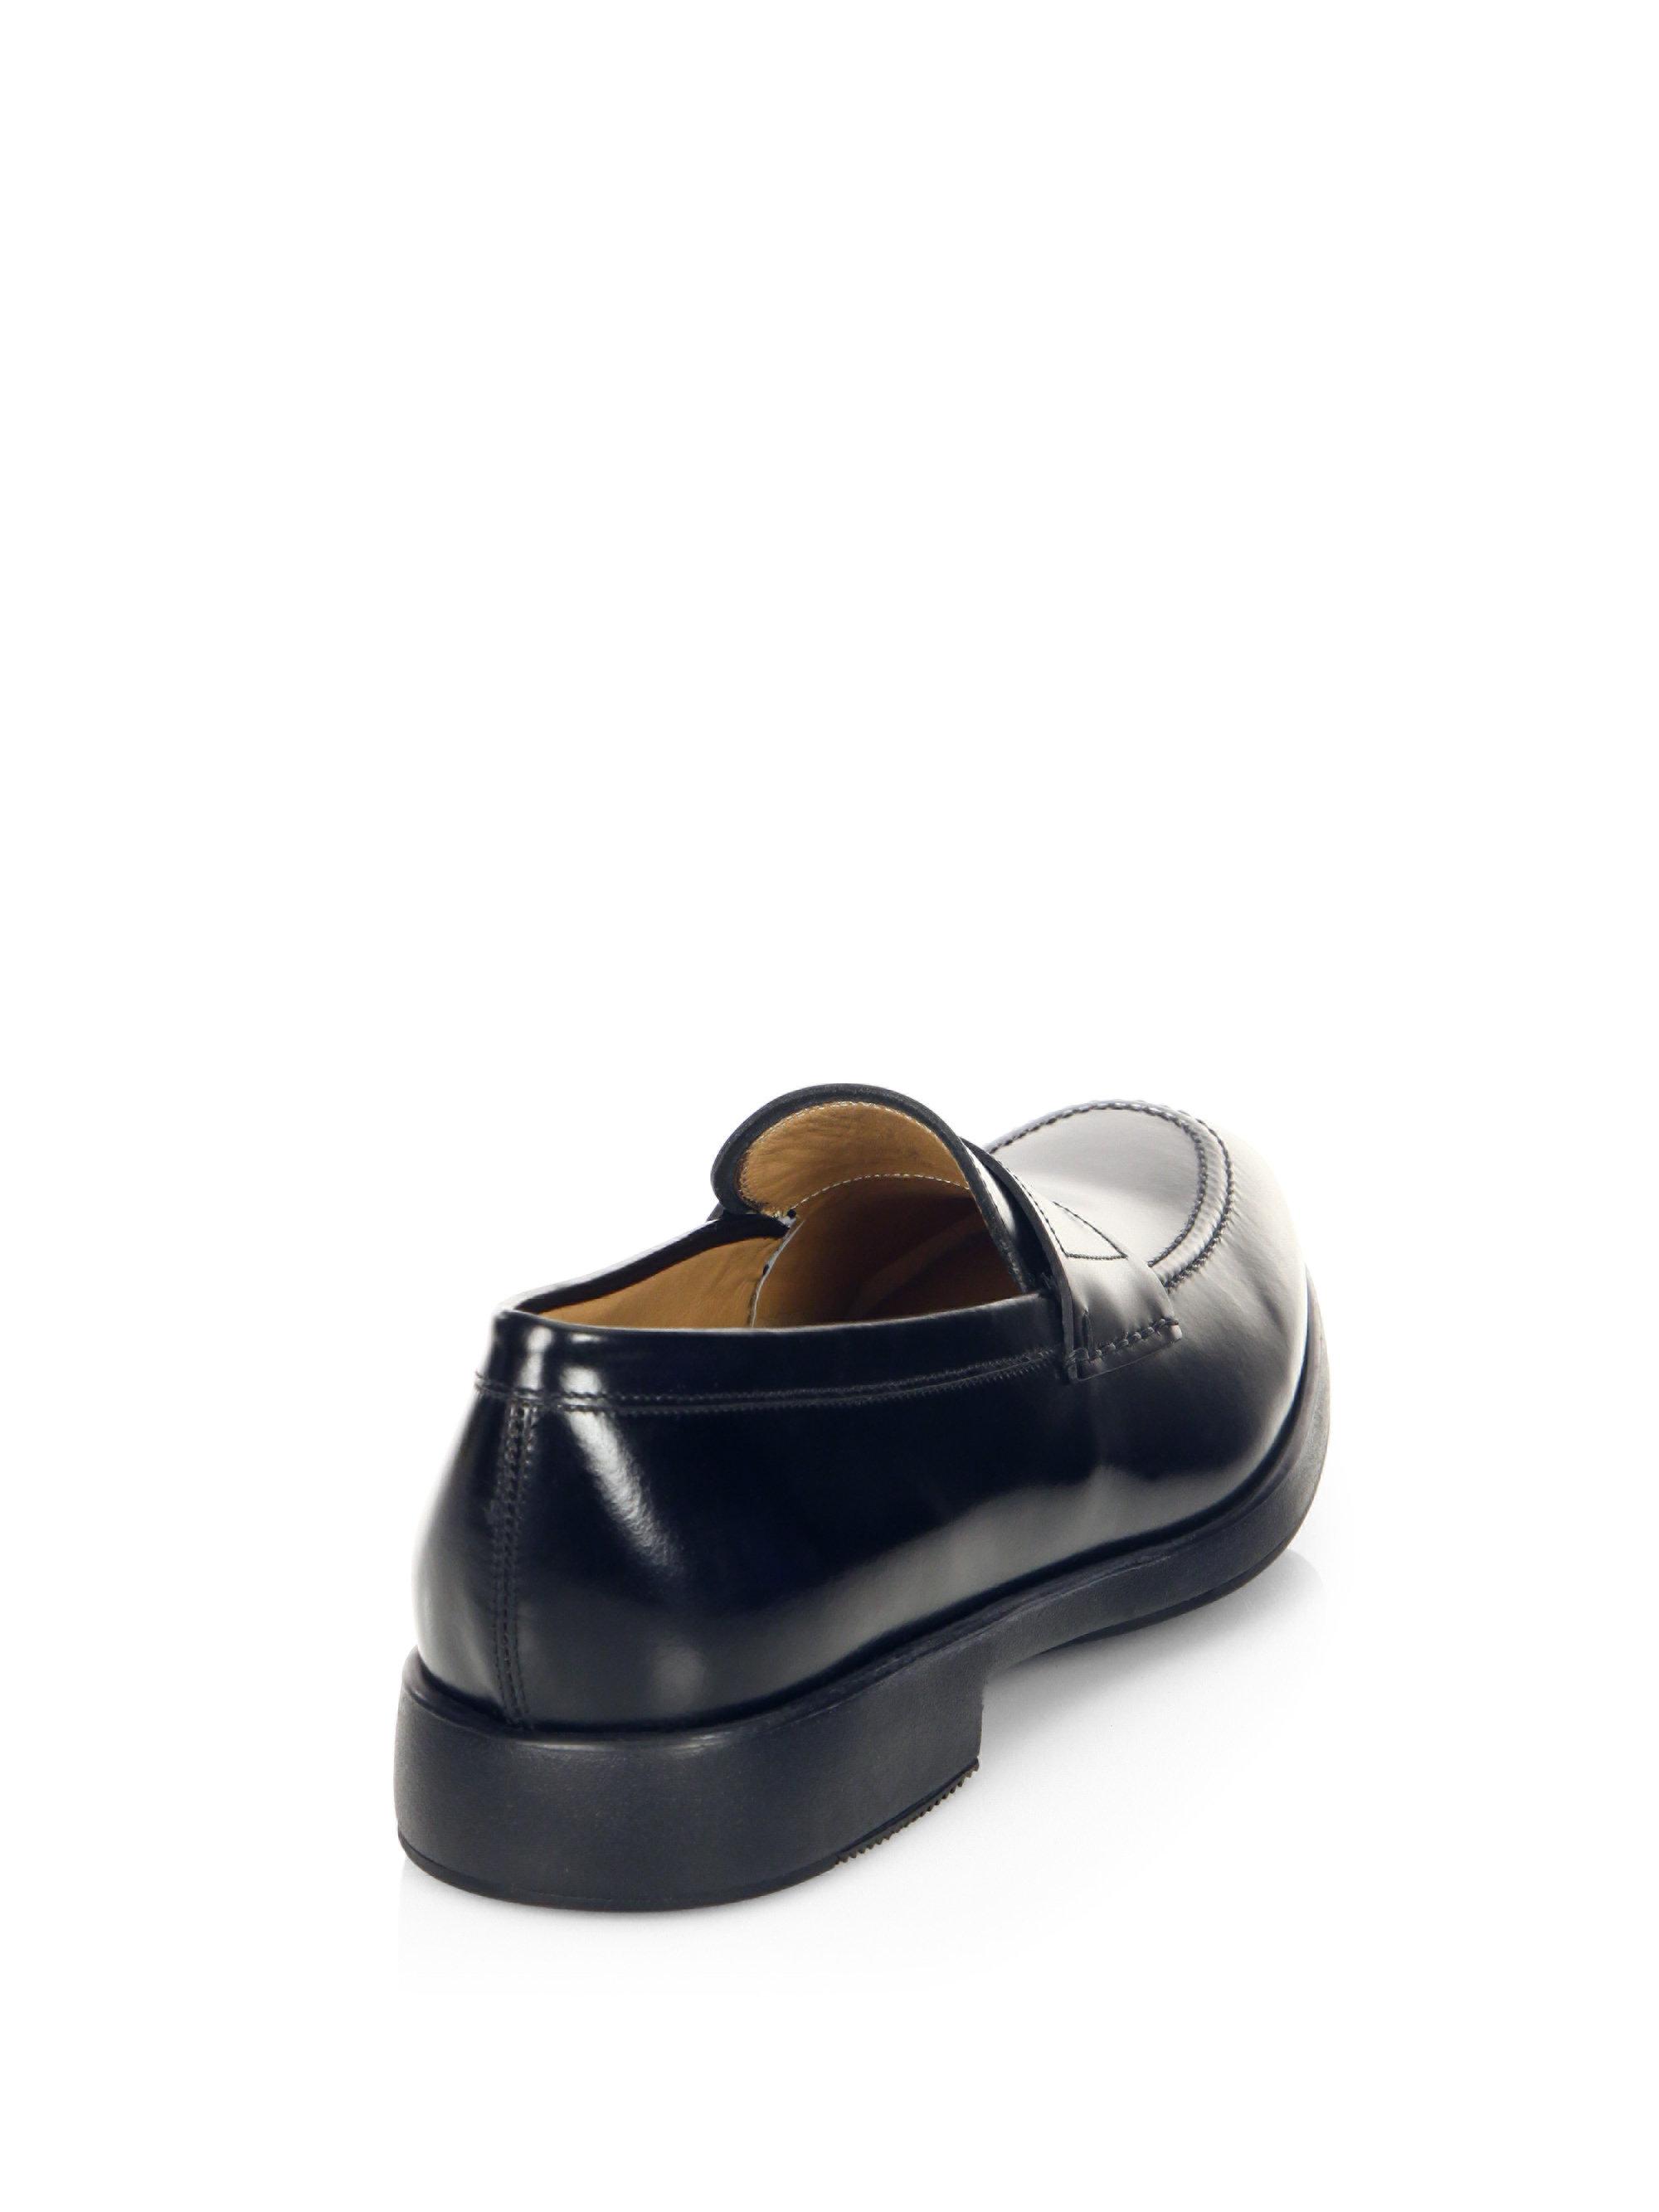 Ferragamo Lucky Leather Penny Loafers in Black for Men - Lyst